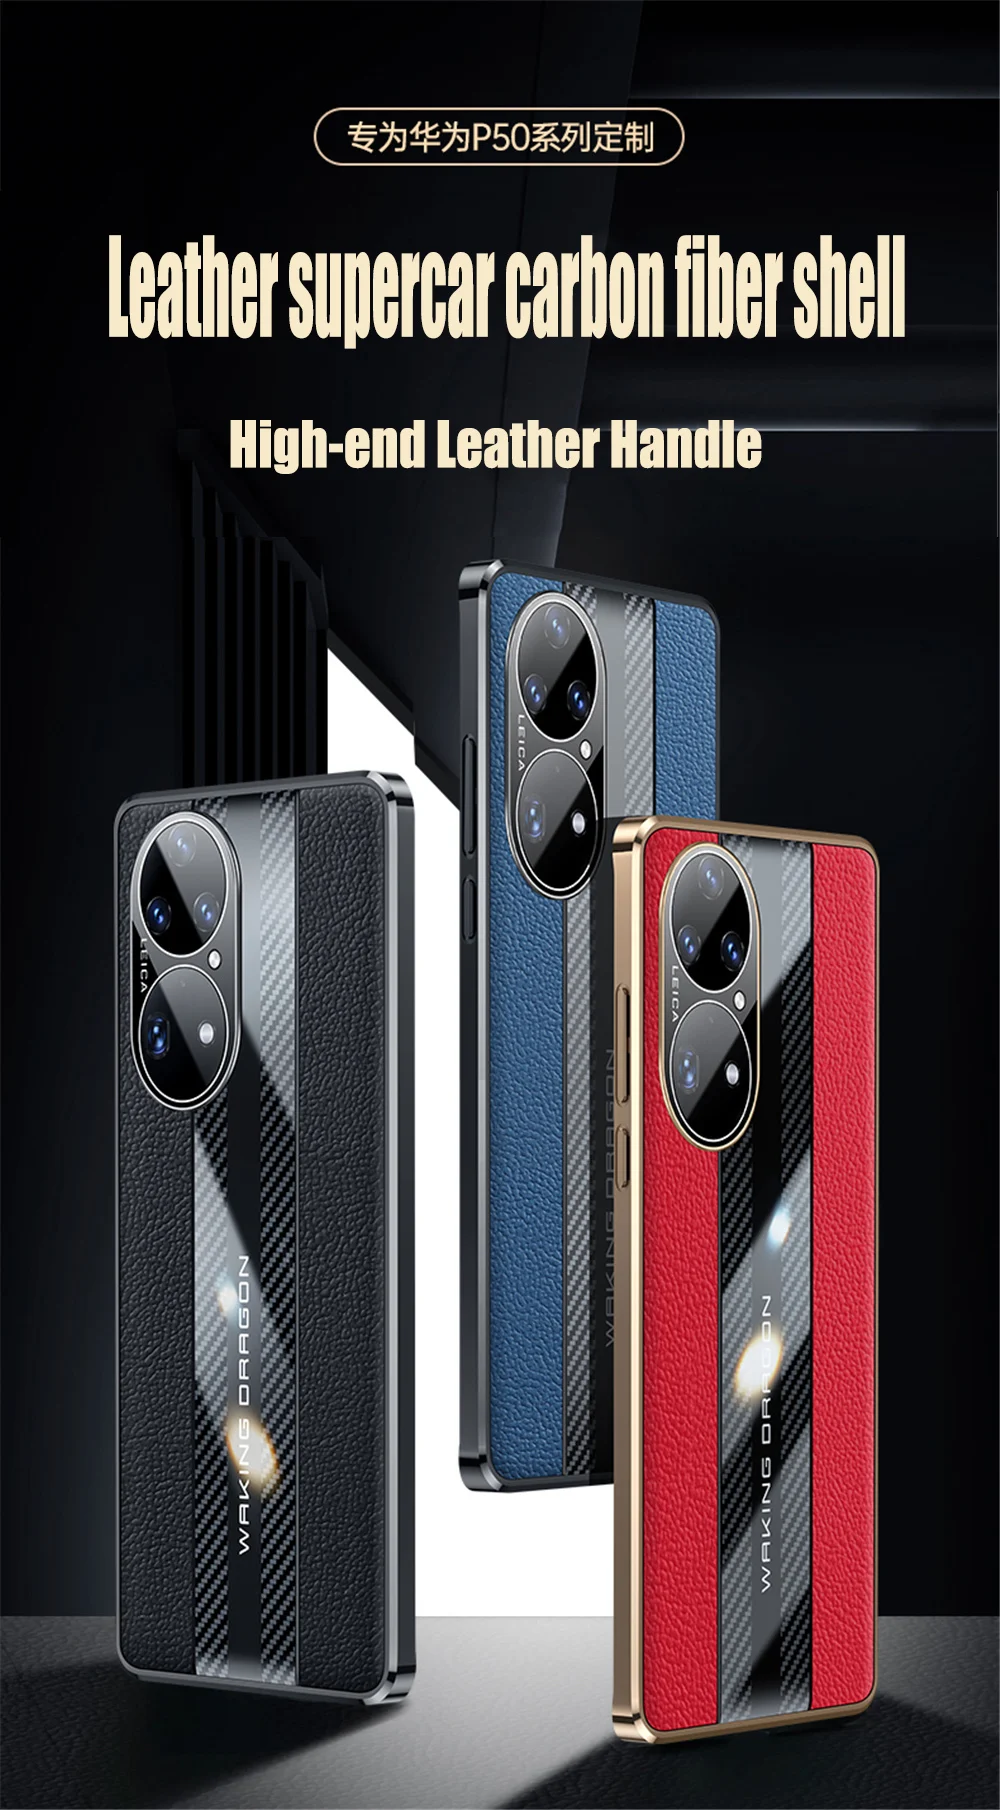 iphone 12 pro flip case Luxury Carbon Fiber Genuine Leather Cover For Huawei P50 Honor 50 60 Pro 5G Case With Camera Protection Phone Case Coque Fundas case for iphone 12 pro